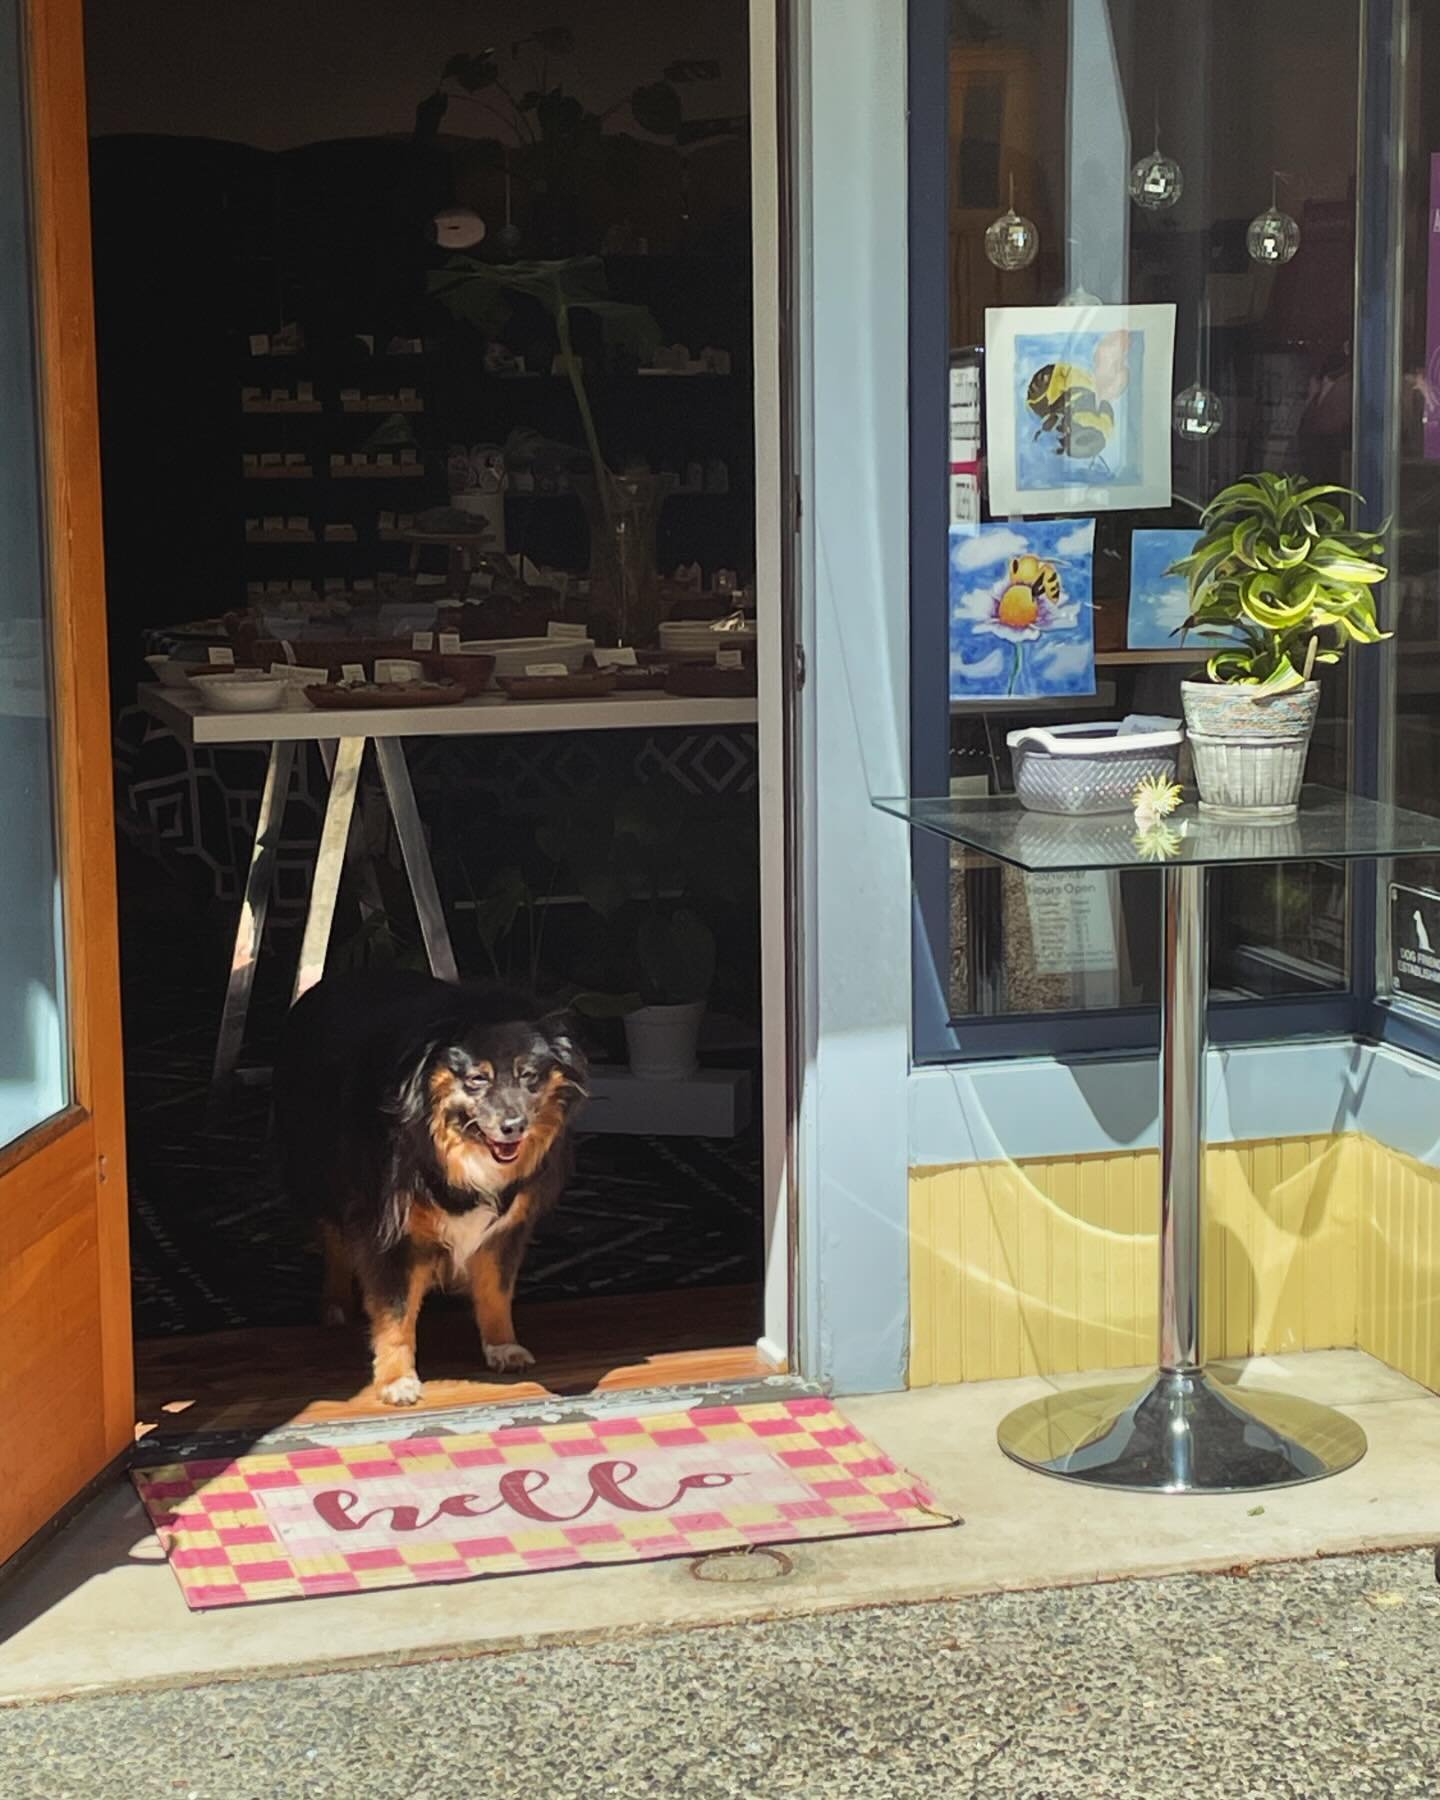 Sophie is excited it&rsquo;s so sunny out today!  We are looking forward to a nice and busy weekend. Come buy a rock or 2, or more! 💕😊💕.
#fridayvibes #crystalmagic #crystalshop #sunnydays☀️ #soulfulabundance #porttownsend #weekendmode